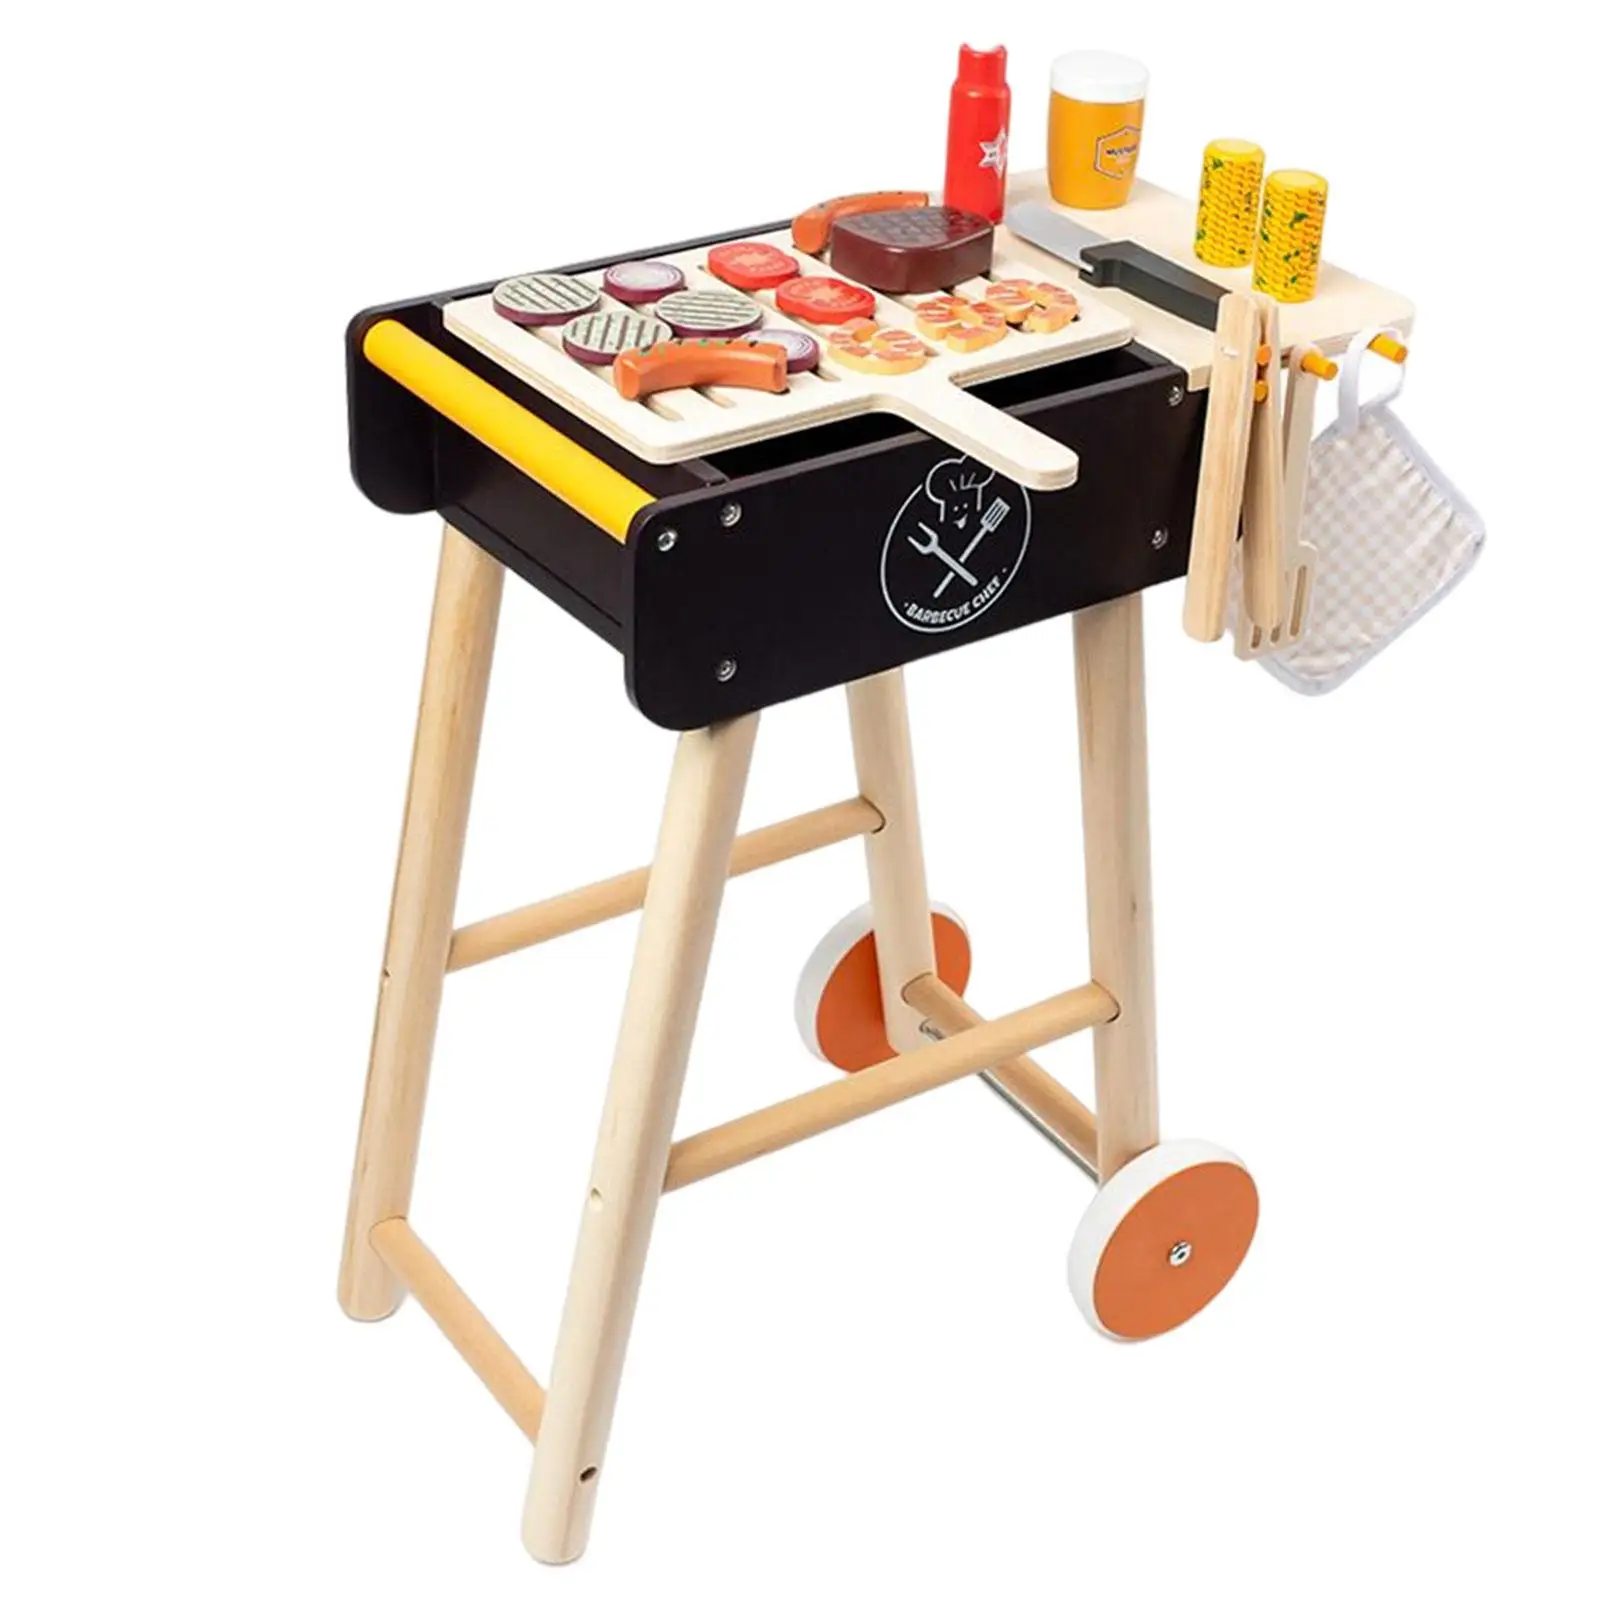 Simulation Kitchen BBQ Playset Early Learning Educational Toy Barbeque Toy Cooking Playset for Kids Children Girls Toddlers